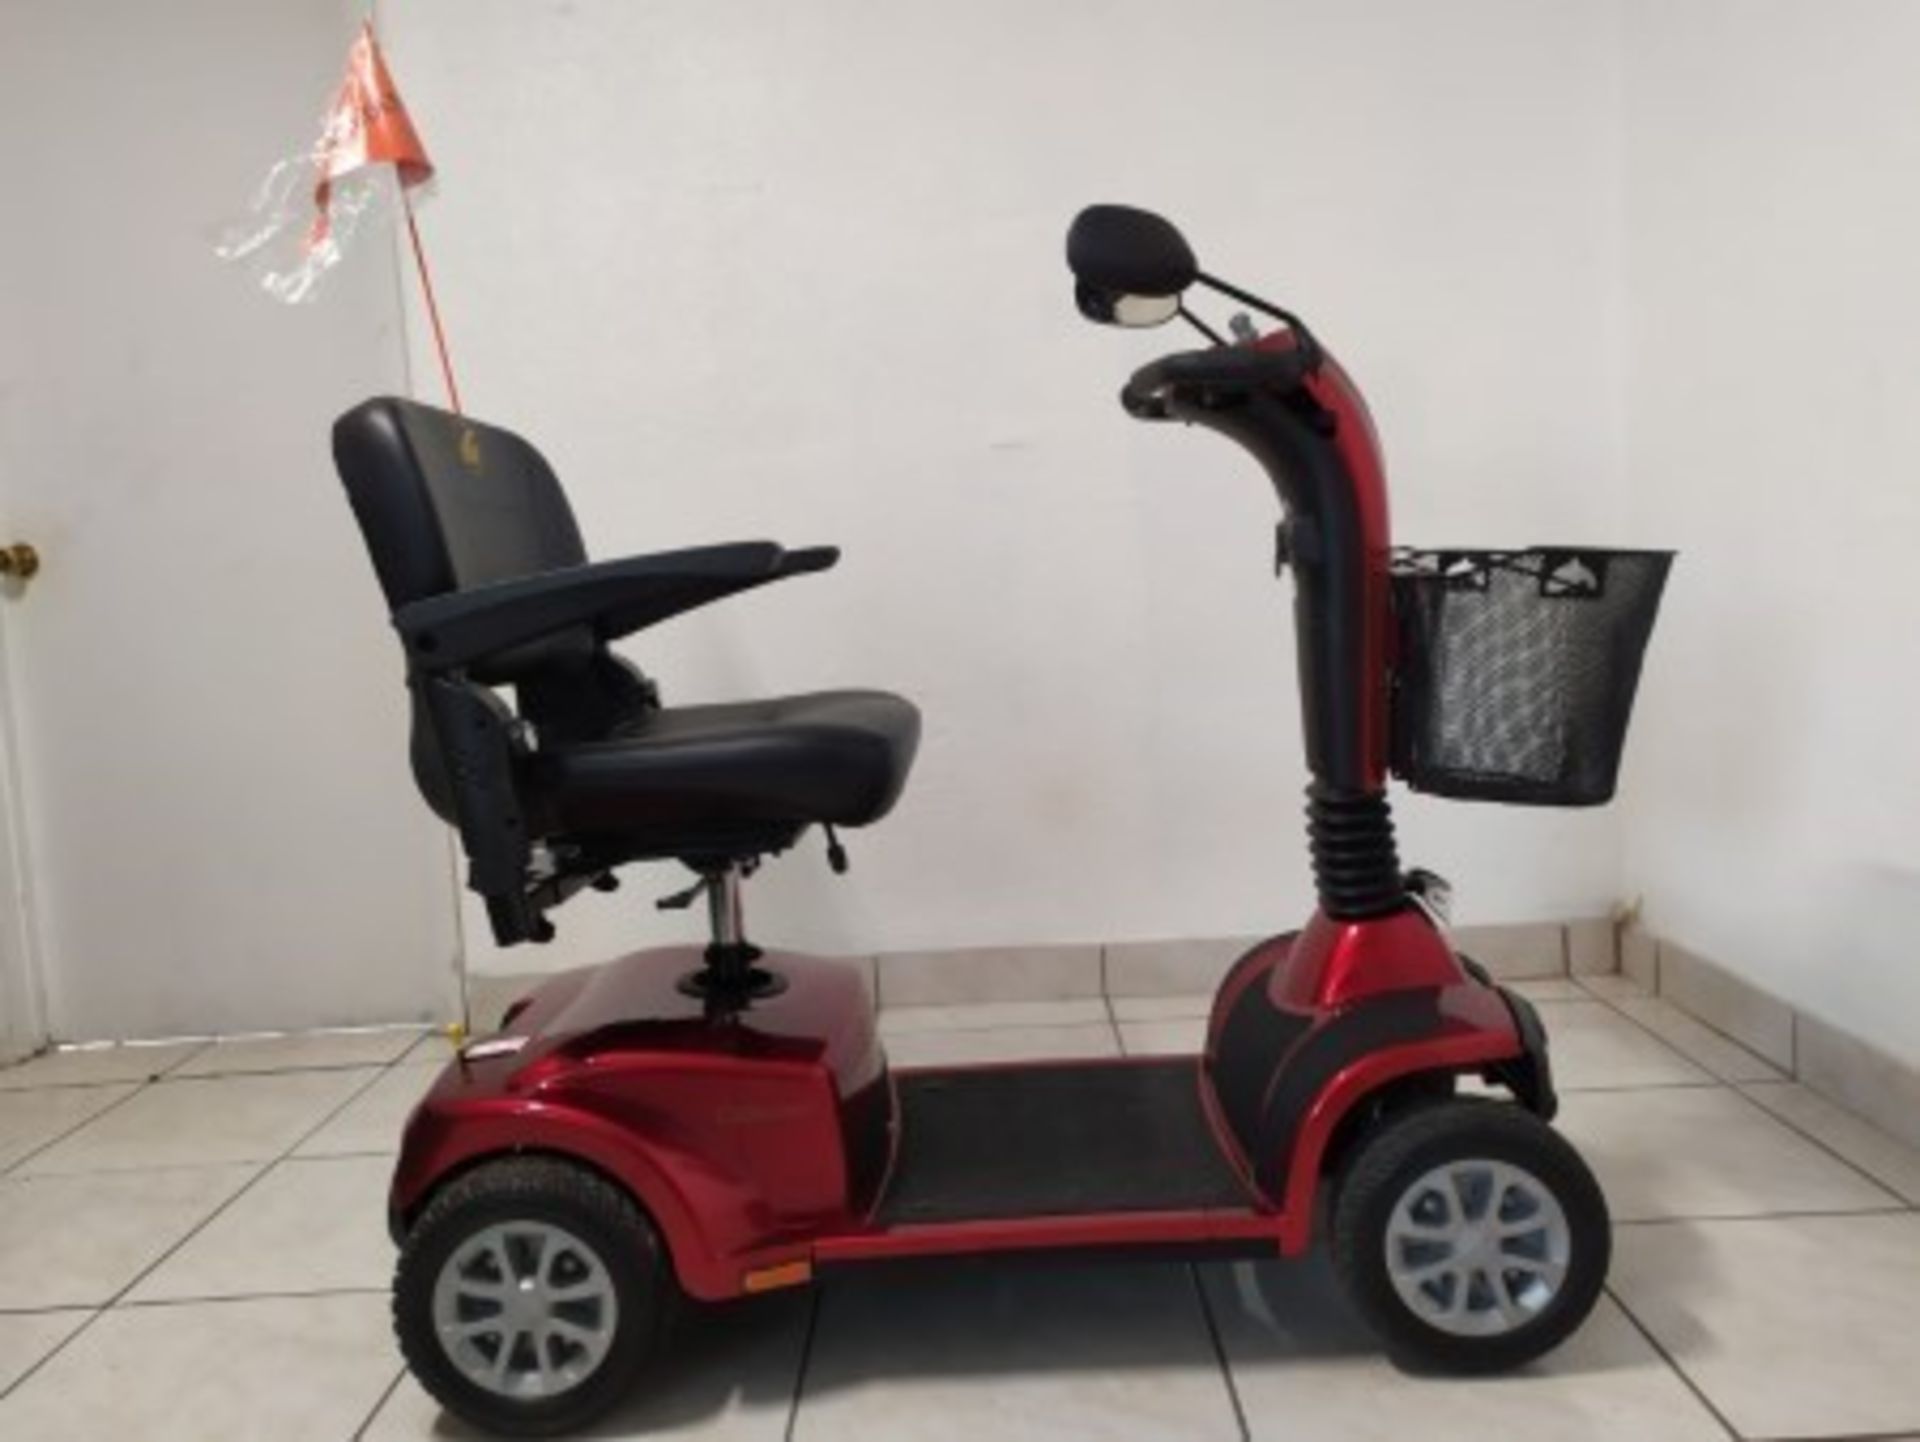 2017 GOLDEN COMPANION GC440 4-WHEEL SCOOTER WITH CHARGER, BASKET & COVER - RED - 400LB CAPACITY - SE - Image 6 of 6